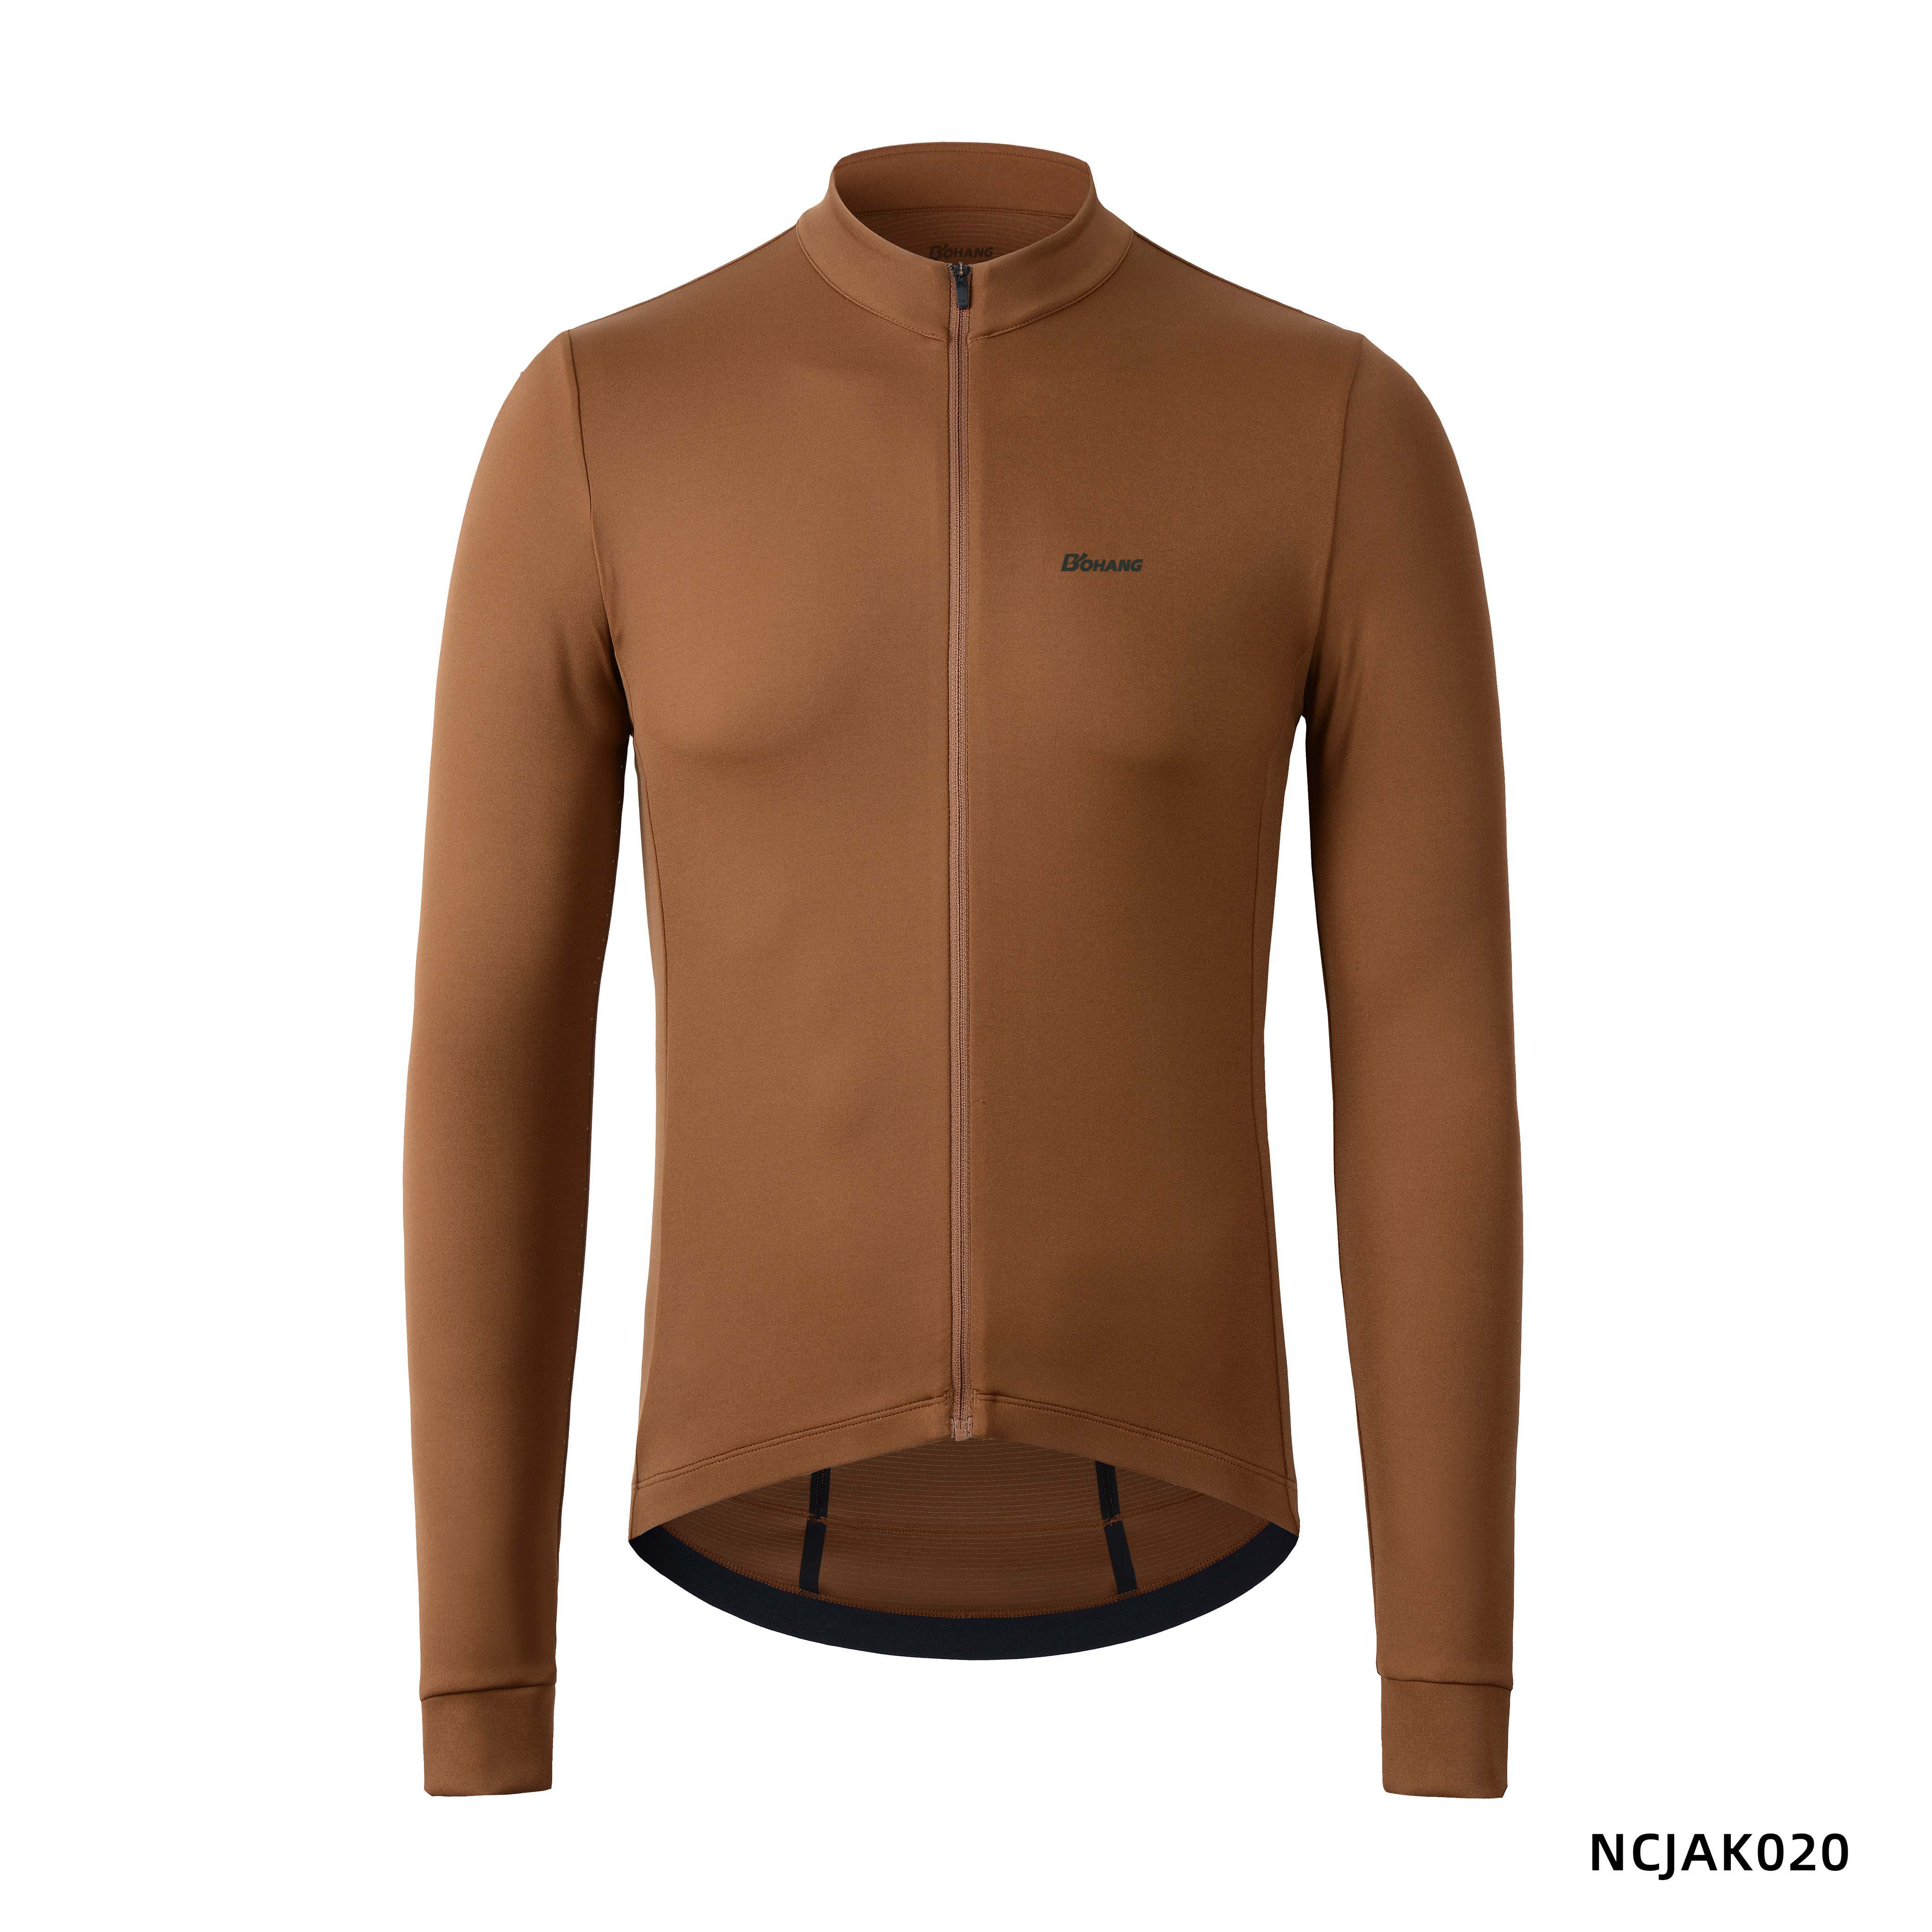 Why the NCJAK020 cycling Jersey is perfect for cycling in spring and autumn?